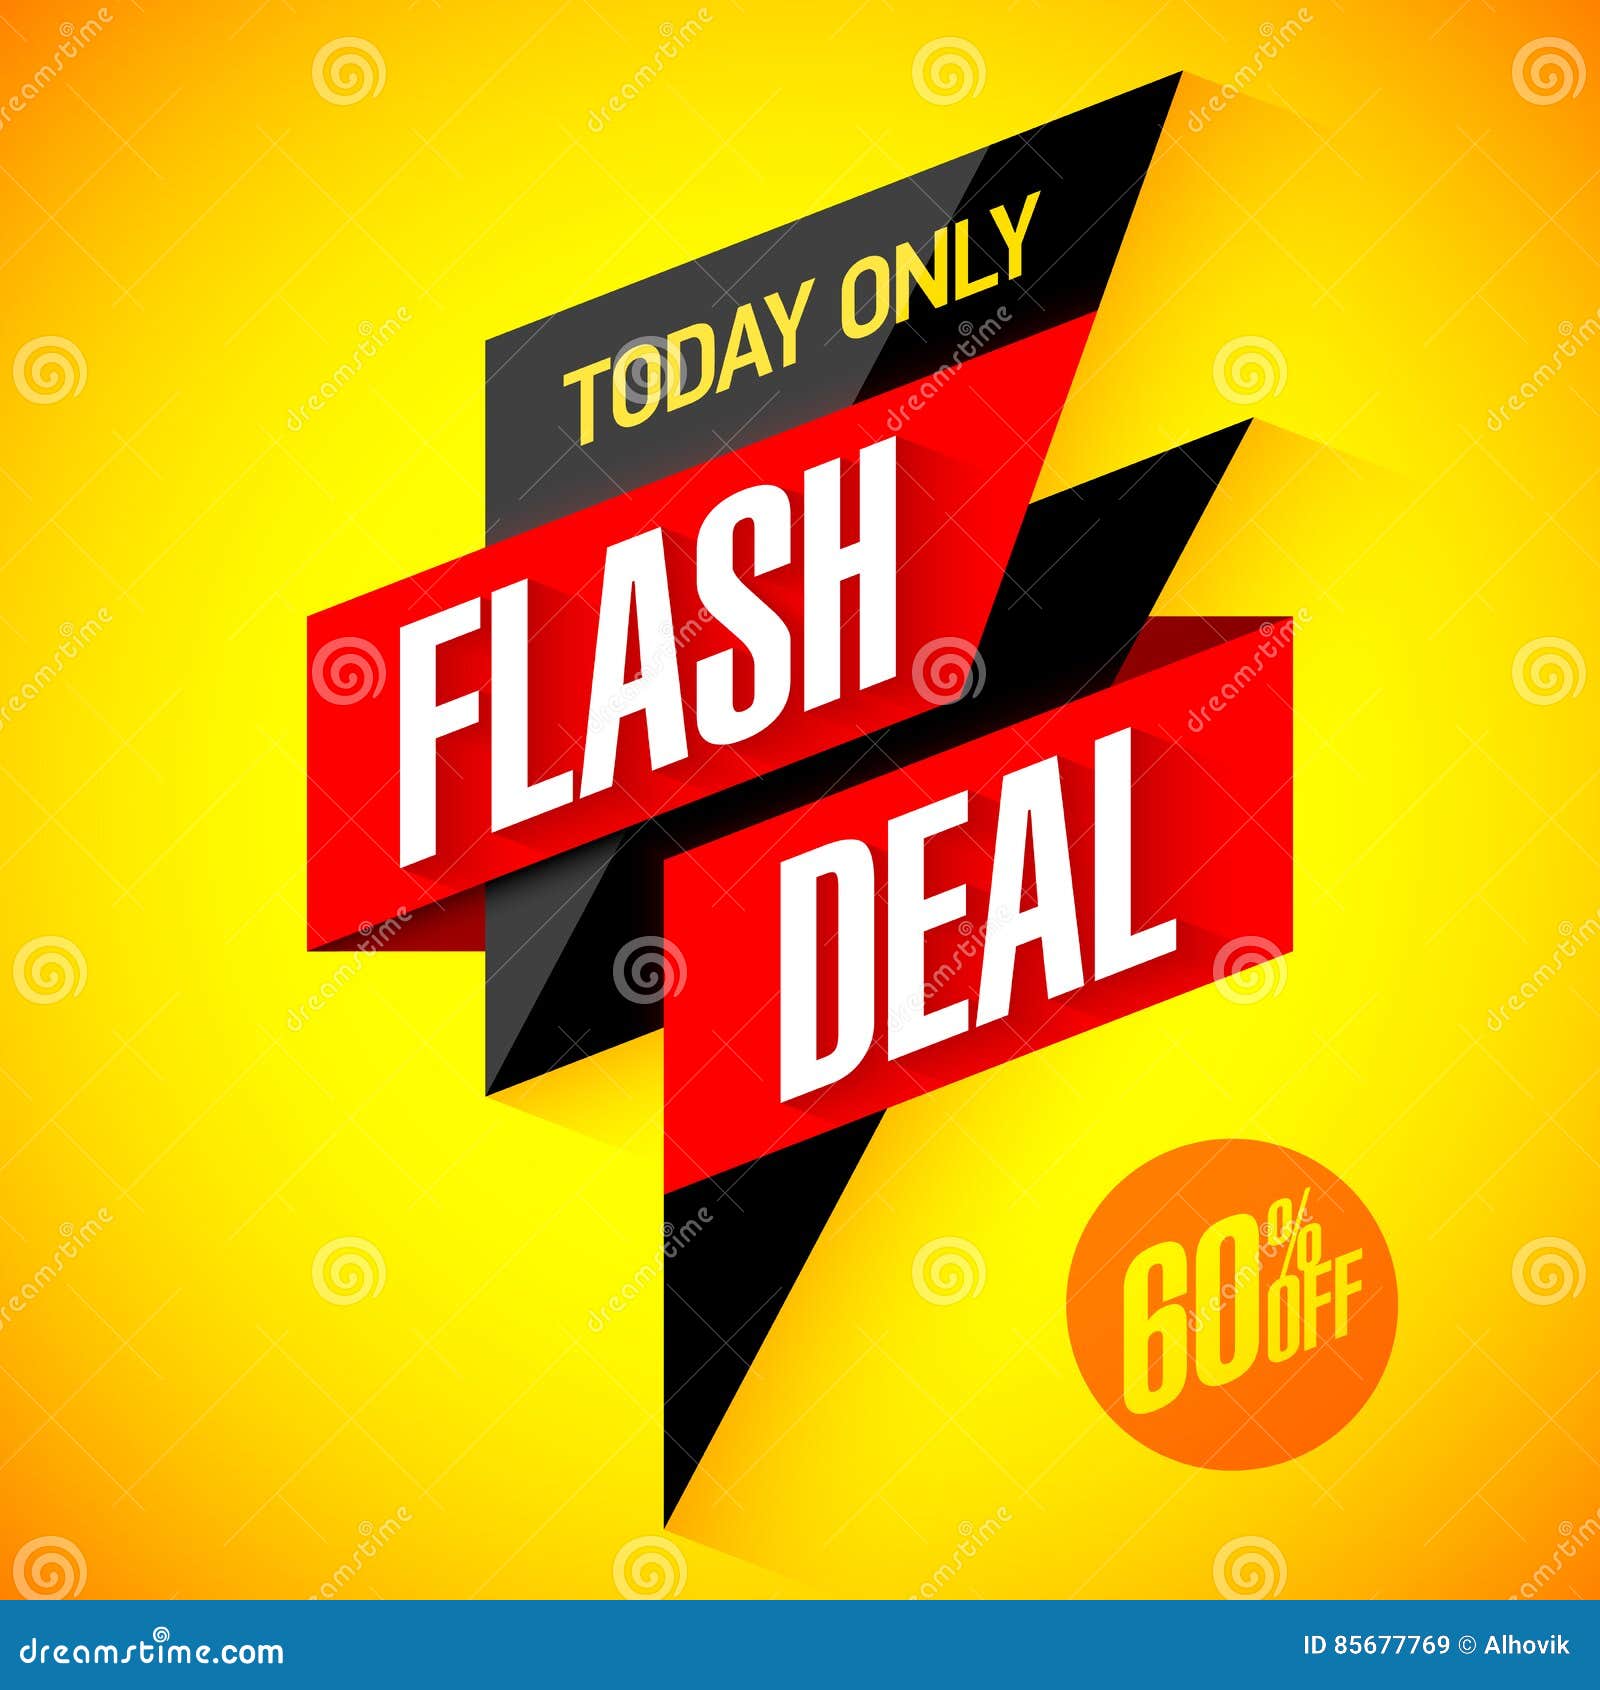 flash deal, today only flash sale special offer banner